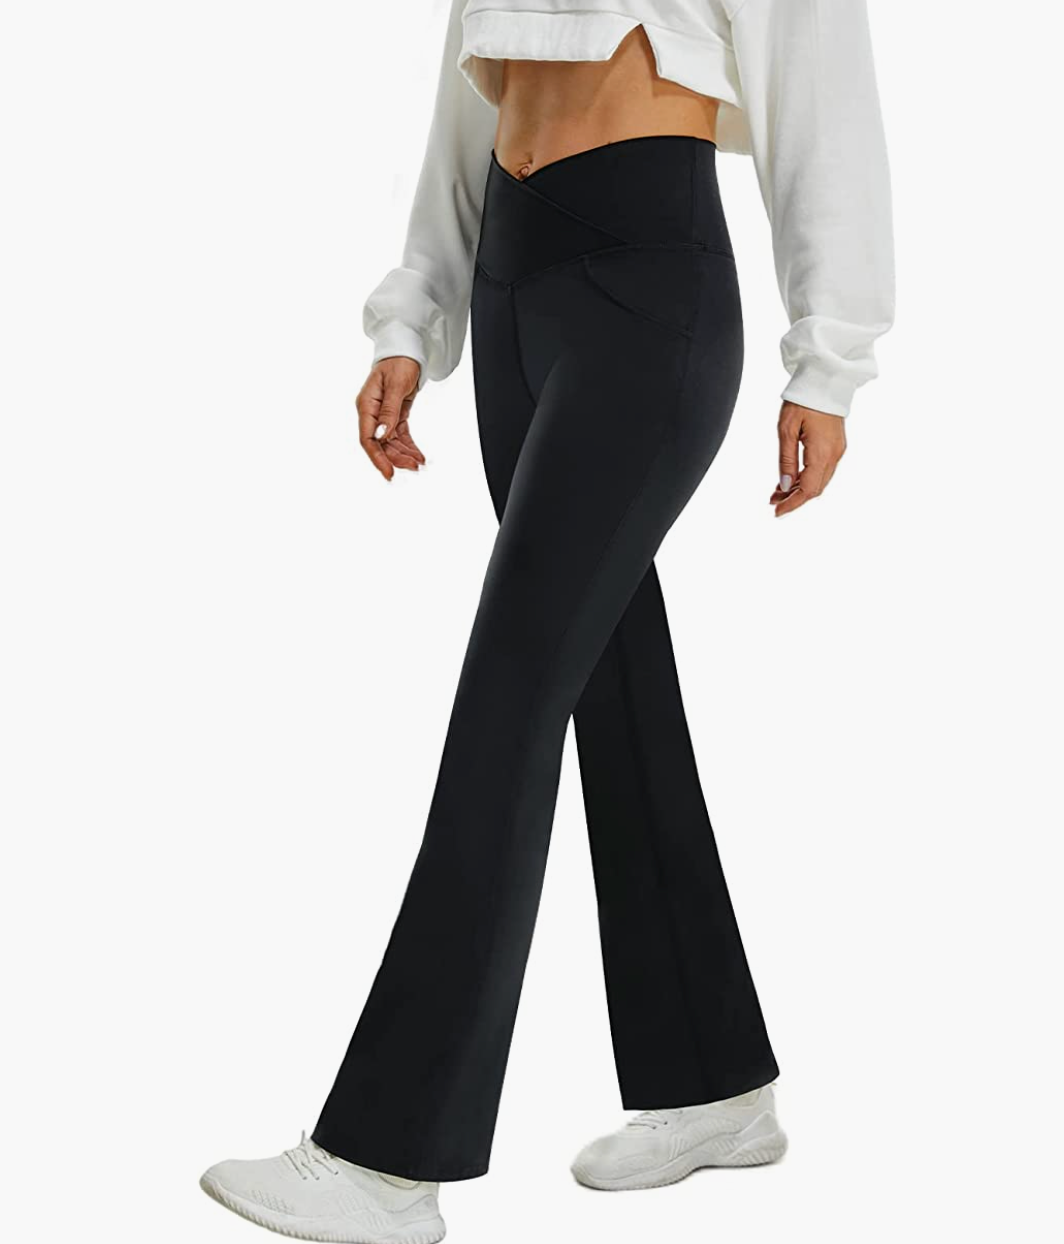 13 Petite Wide Leg Jeans You Won't Have To Tailor - Starting at $27 –  topsfordays